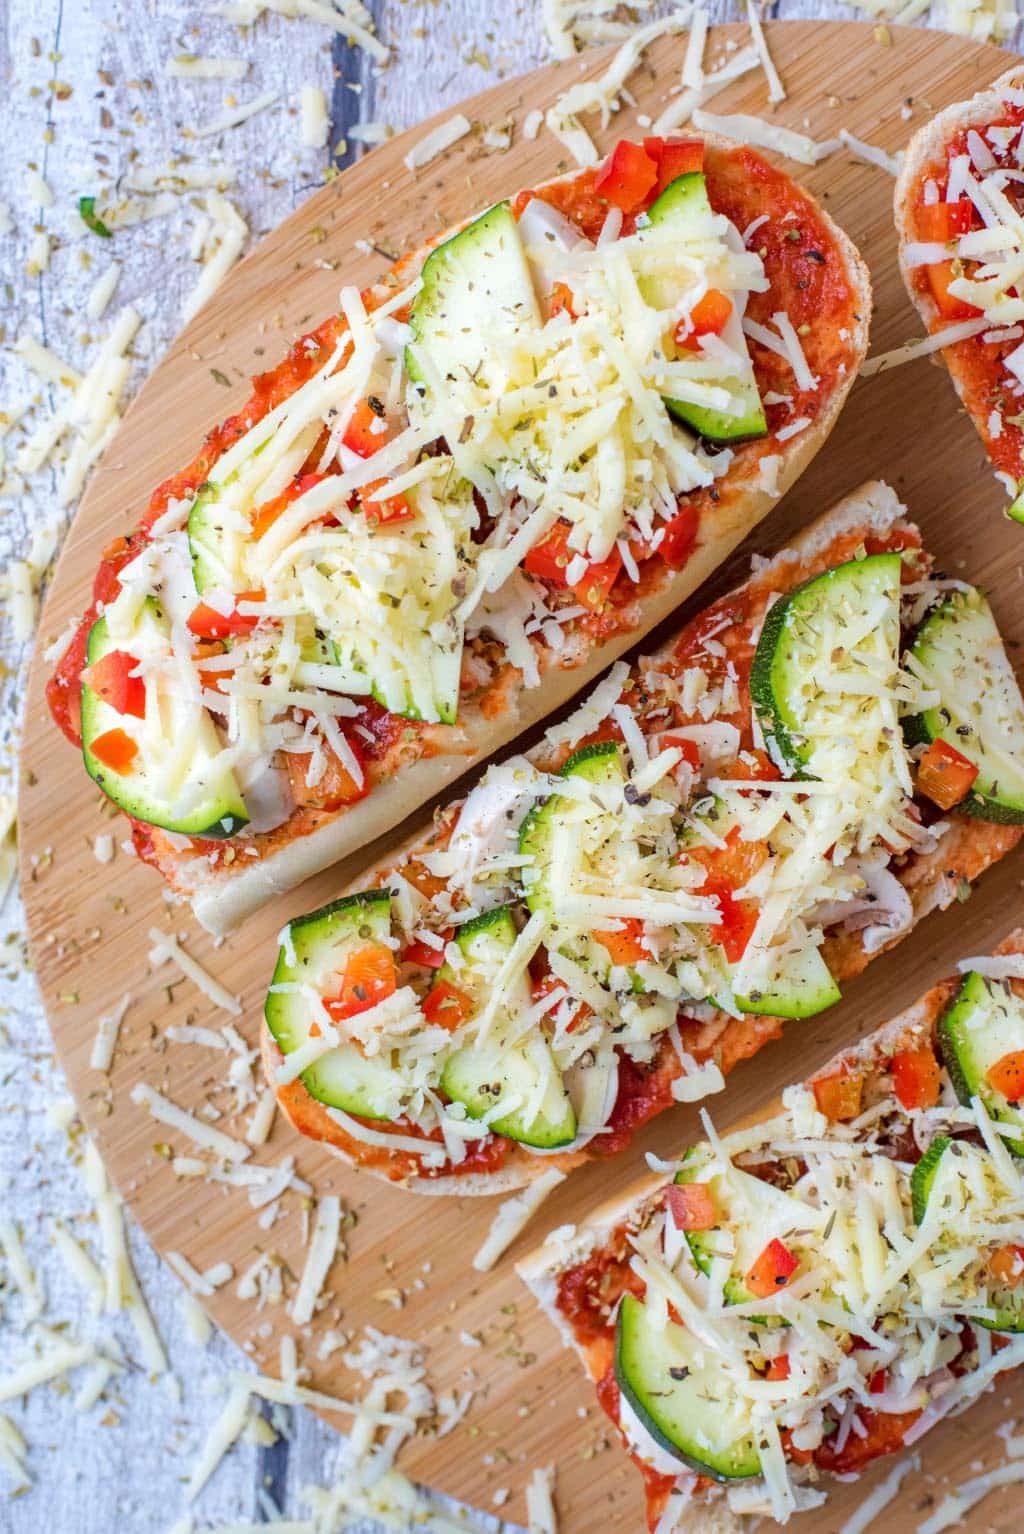 Sliced French bread topped with vegetables and cheese.